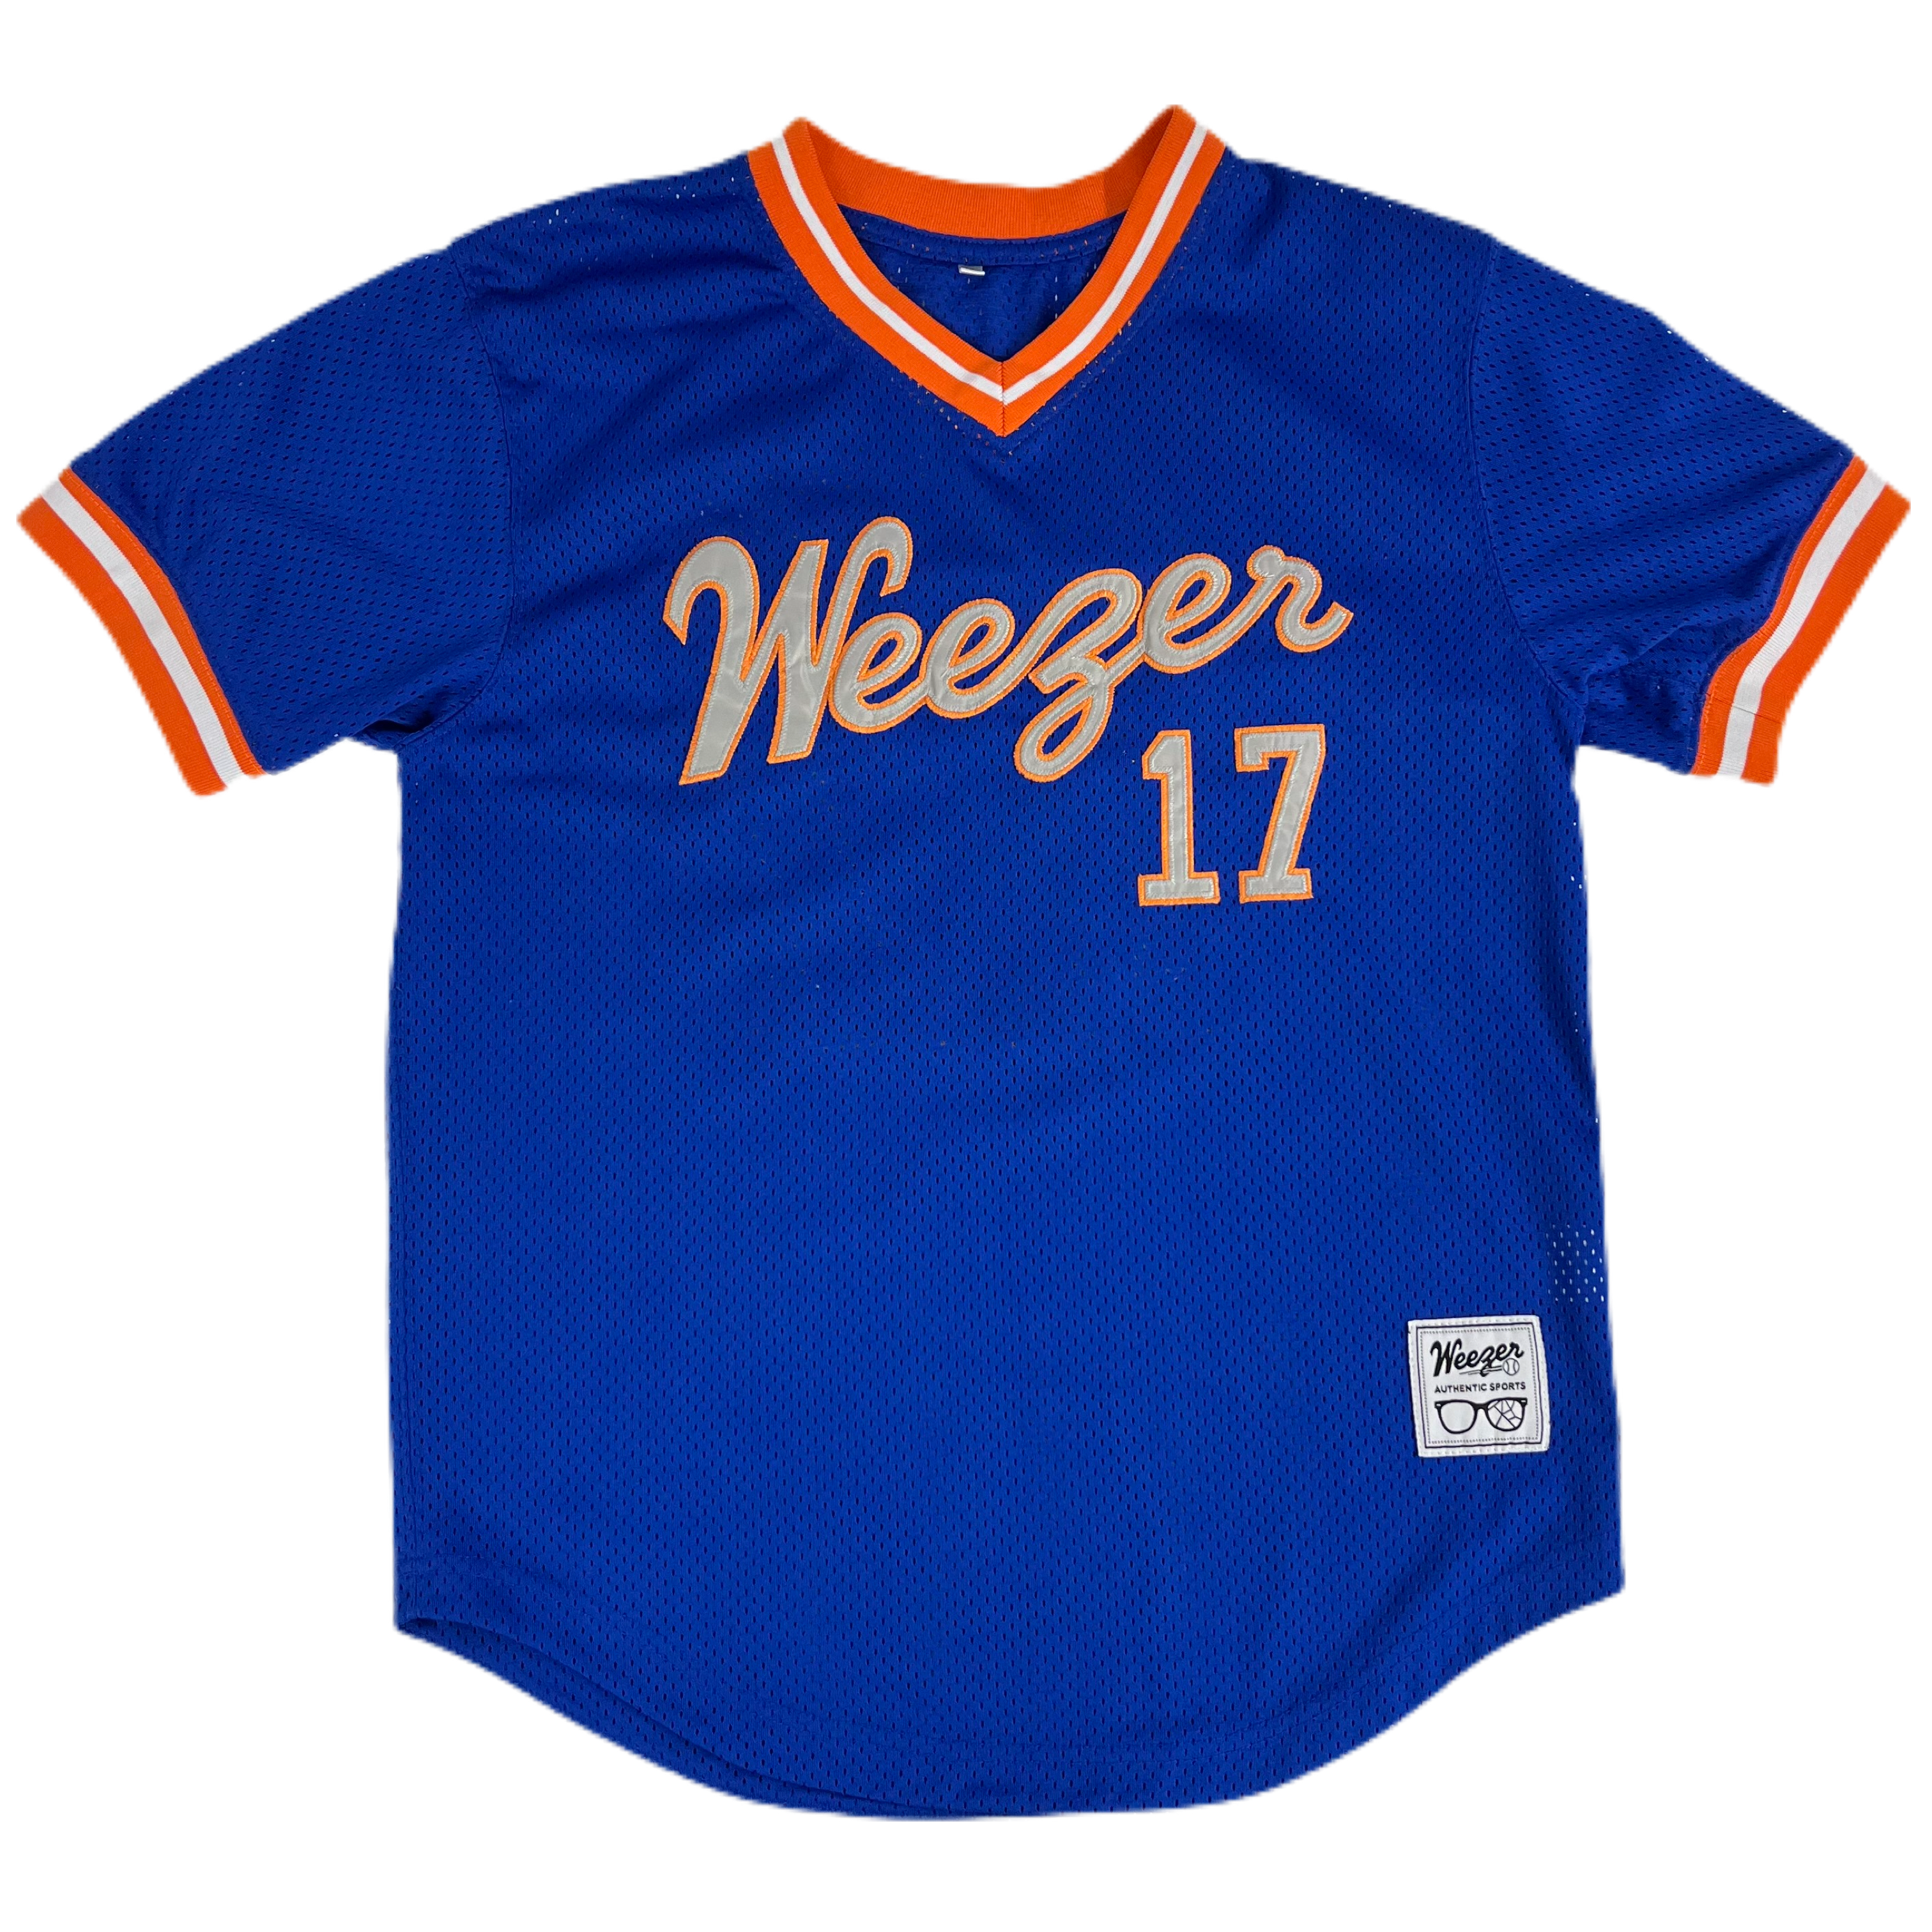 New York Mets Signed Jerseys, Collectible Mets Jerseys, New York Mets  Memorabilia Jerseys